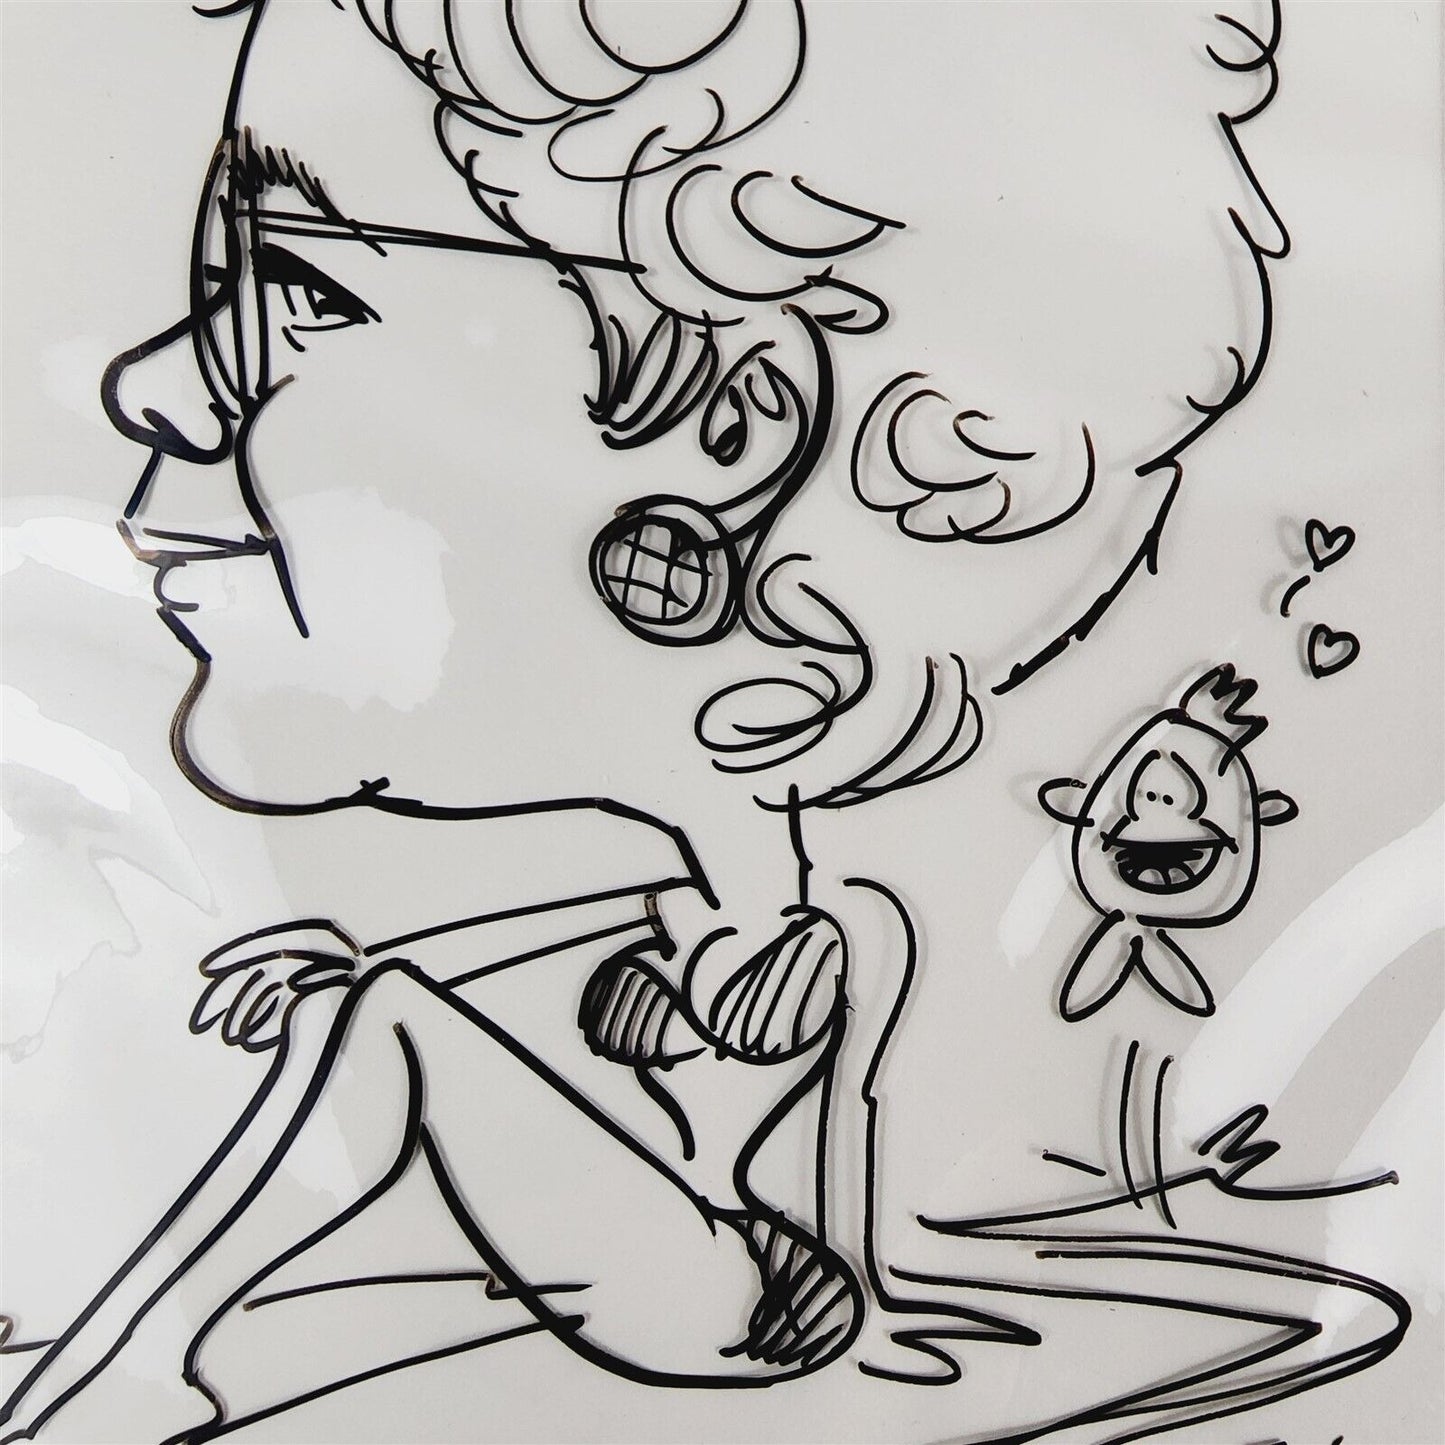 2 Funny Cartoon Sketches Caricatures by Neal, Armeda Beach Beauty Clyde Fishing